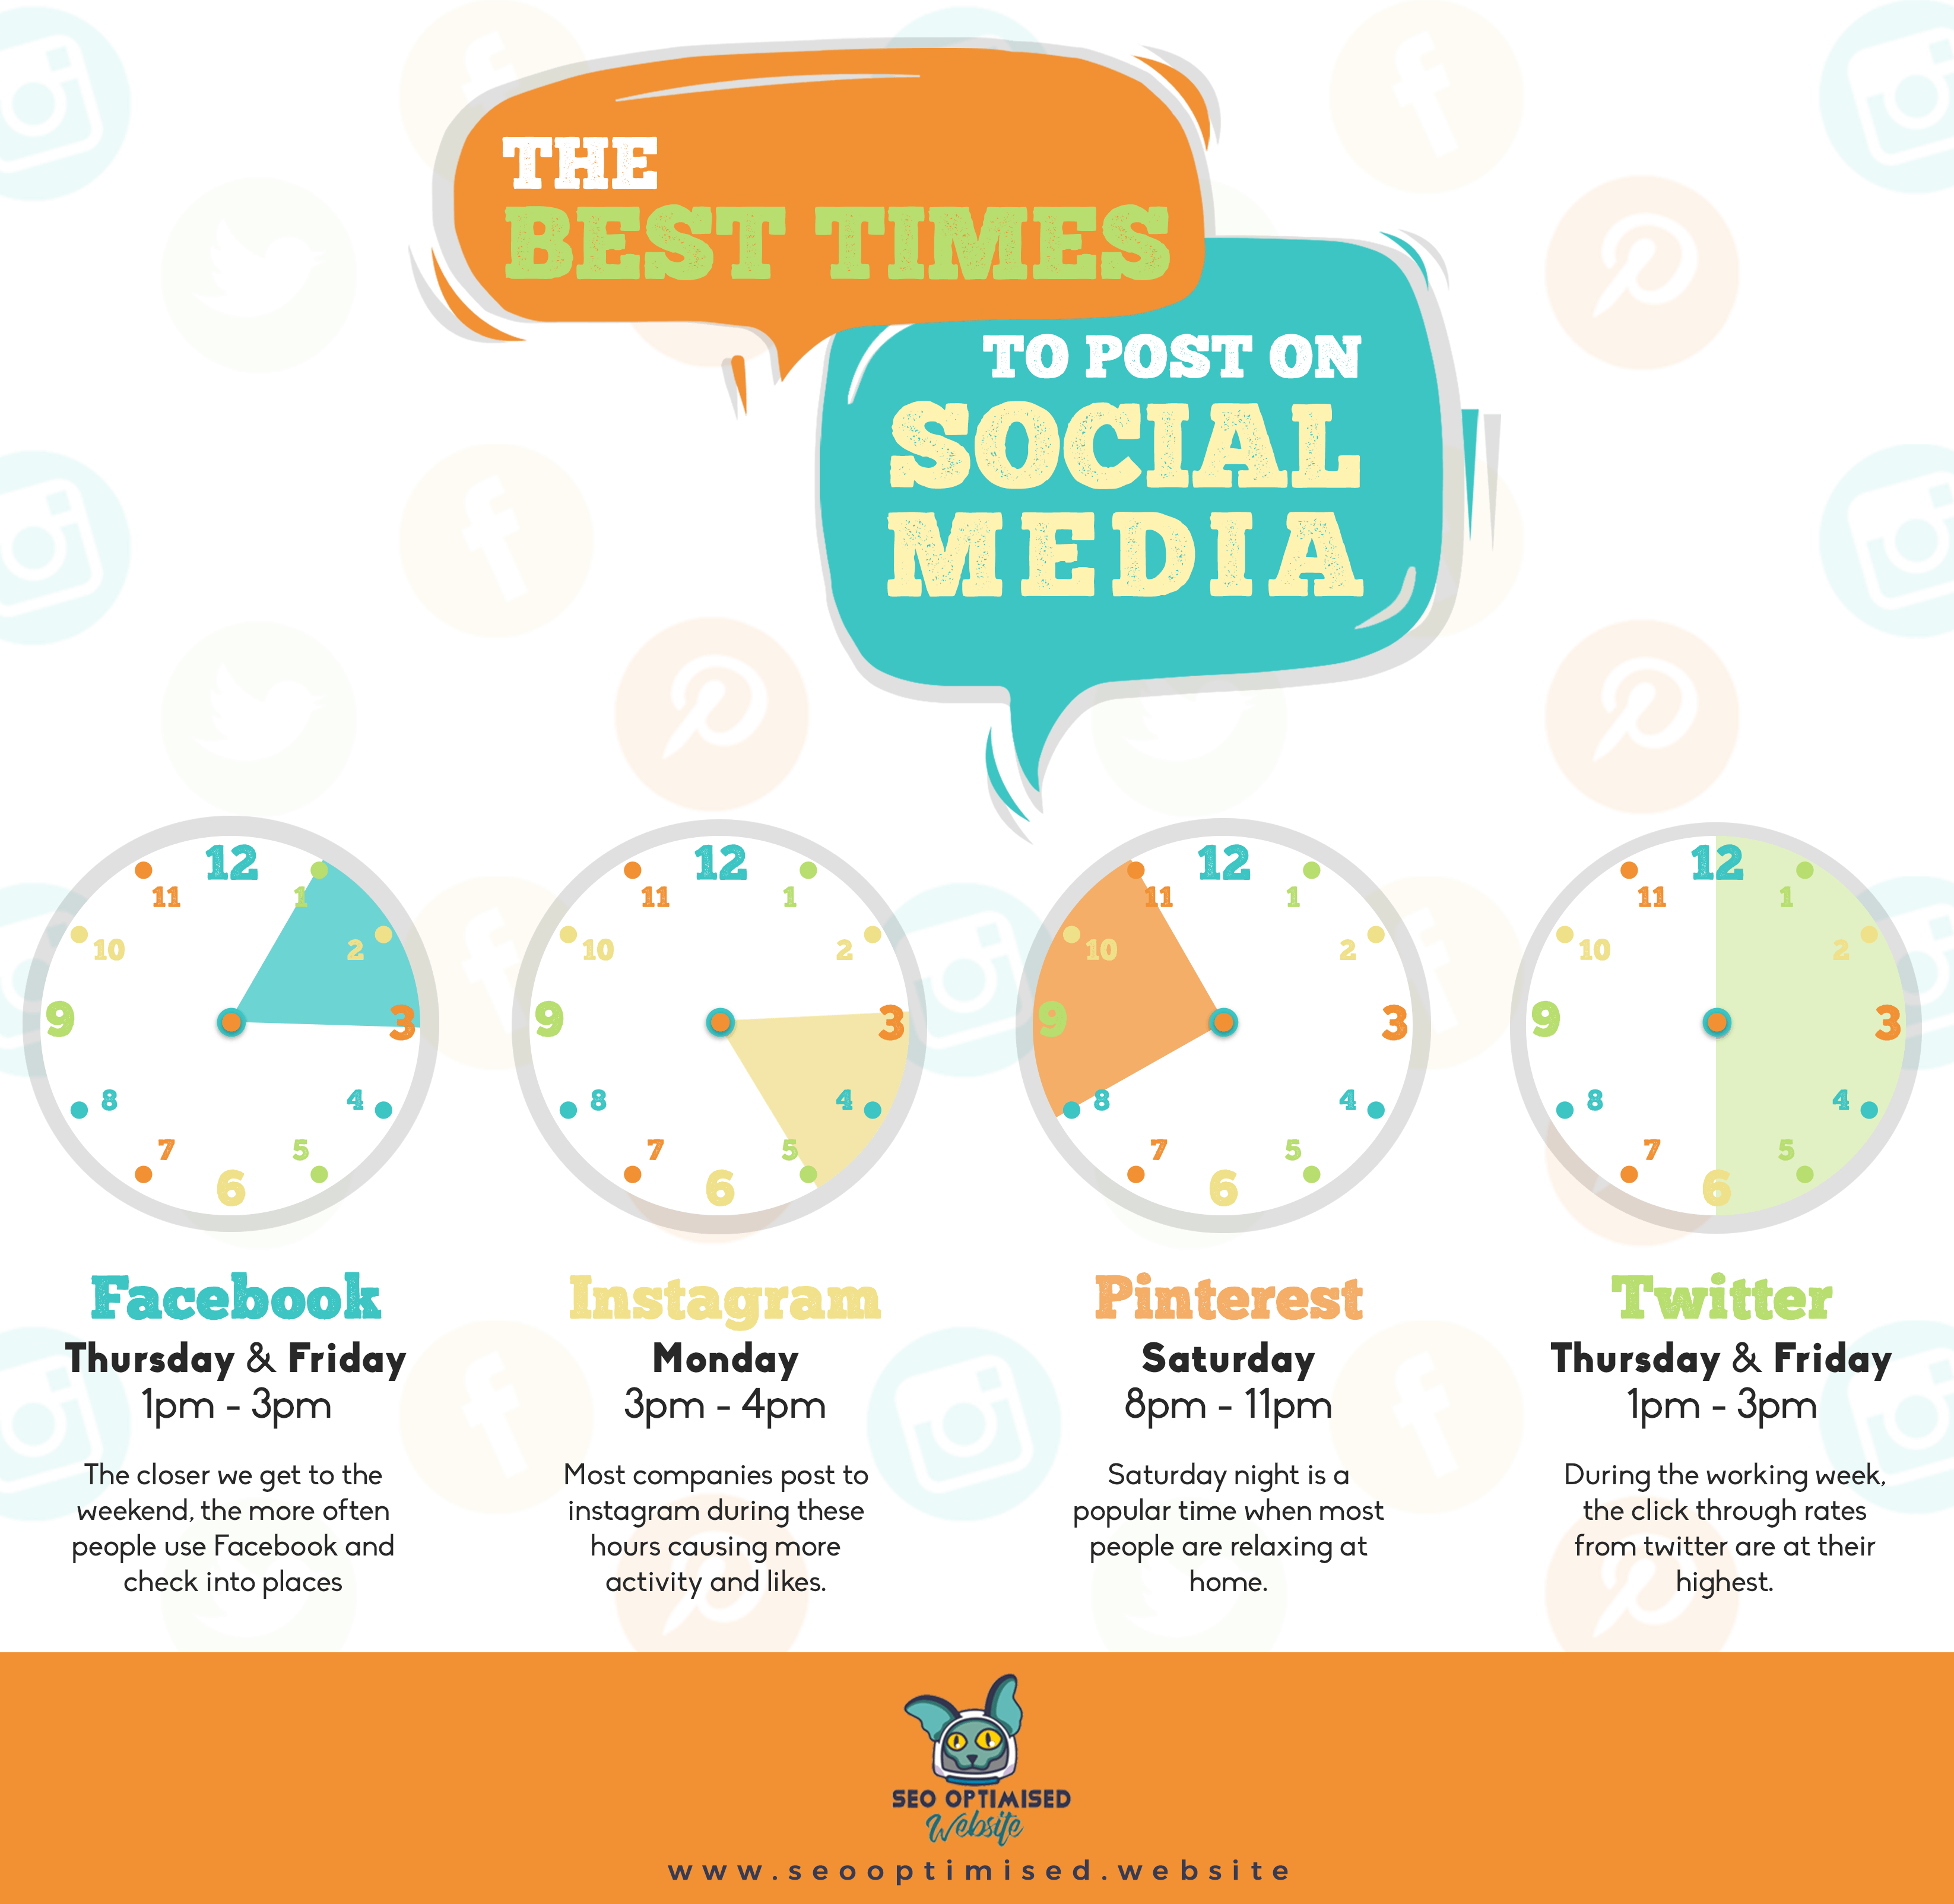 Best Times to Post on Social Media